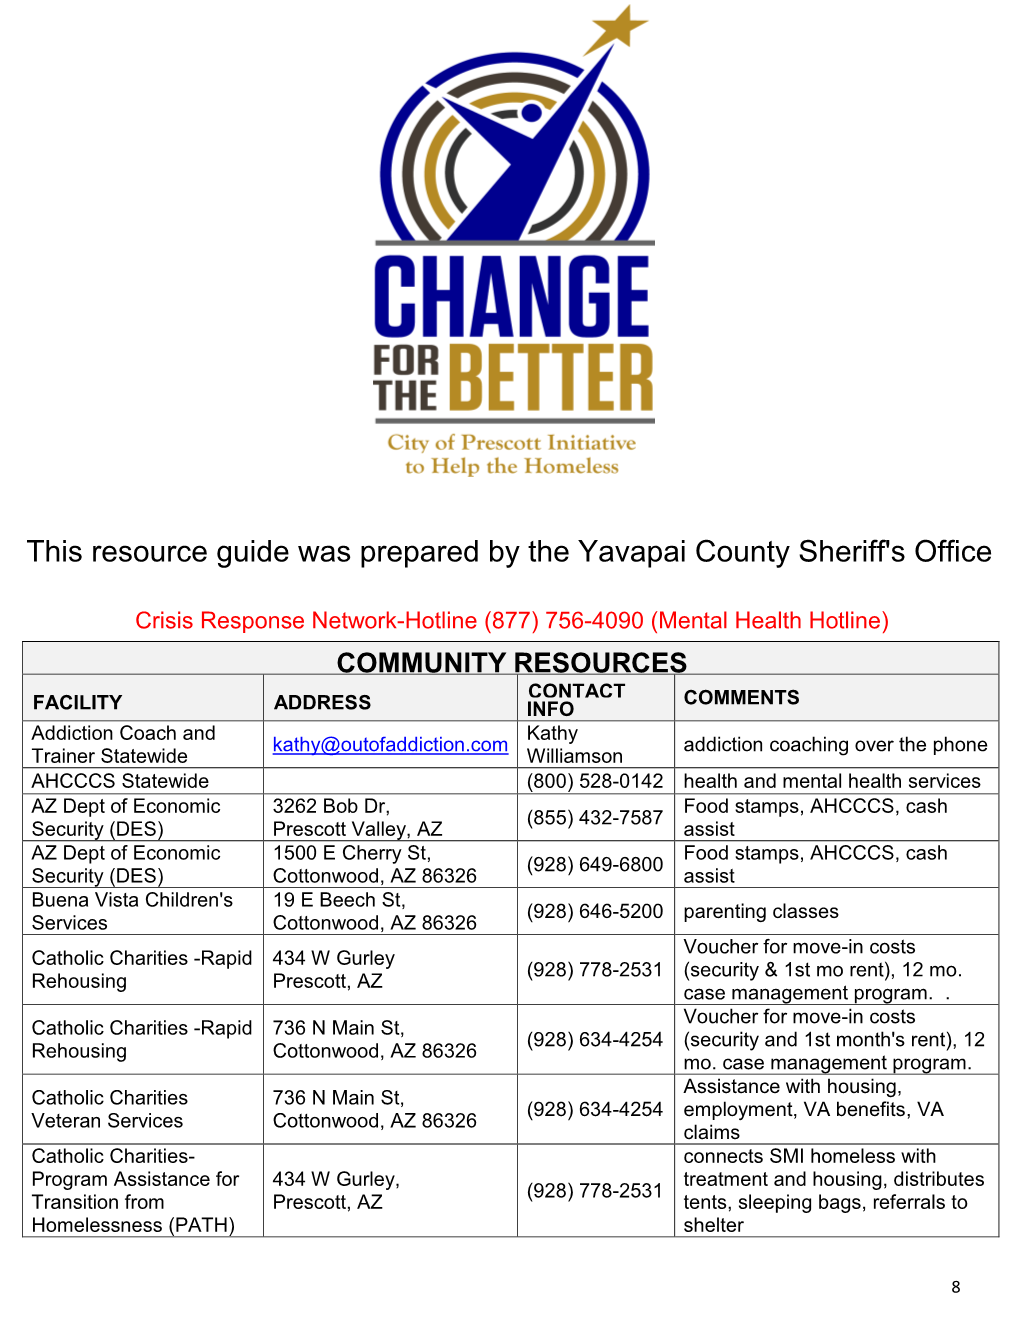 This Resource Guide Was Prepared by the Yavapai County Sheriff's Office